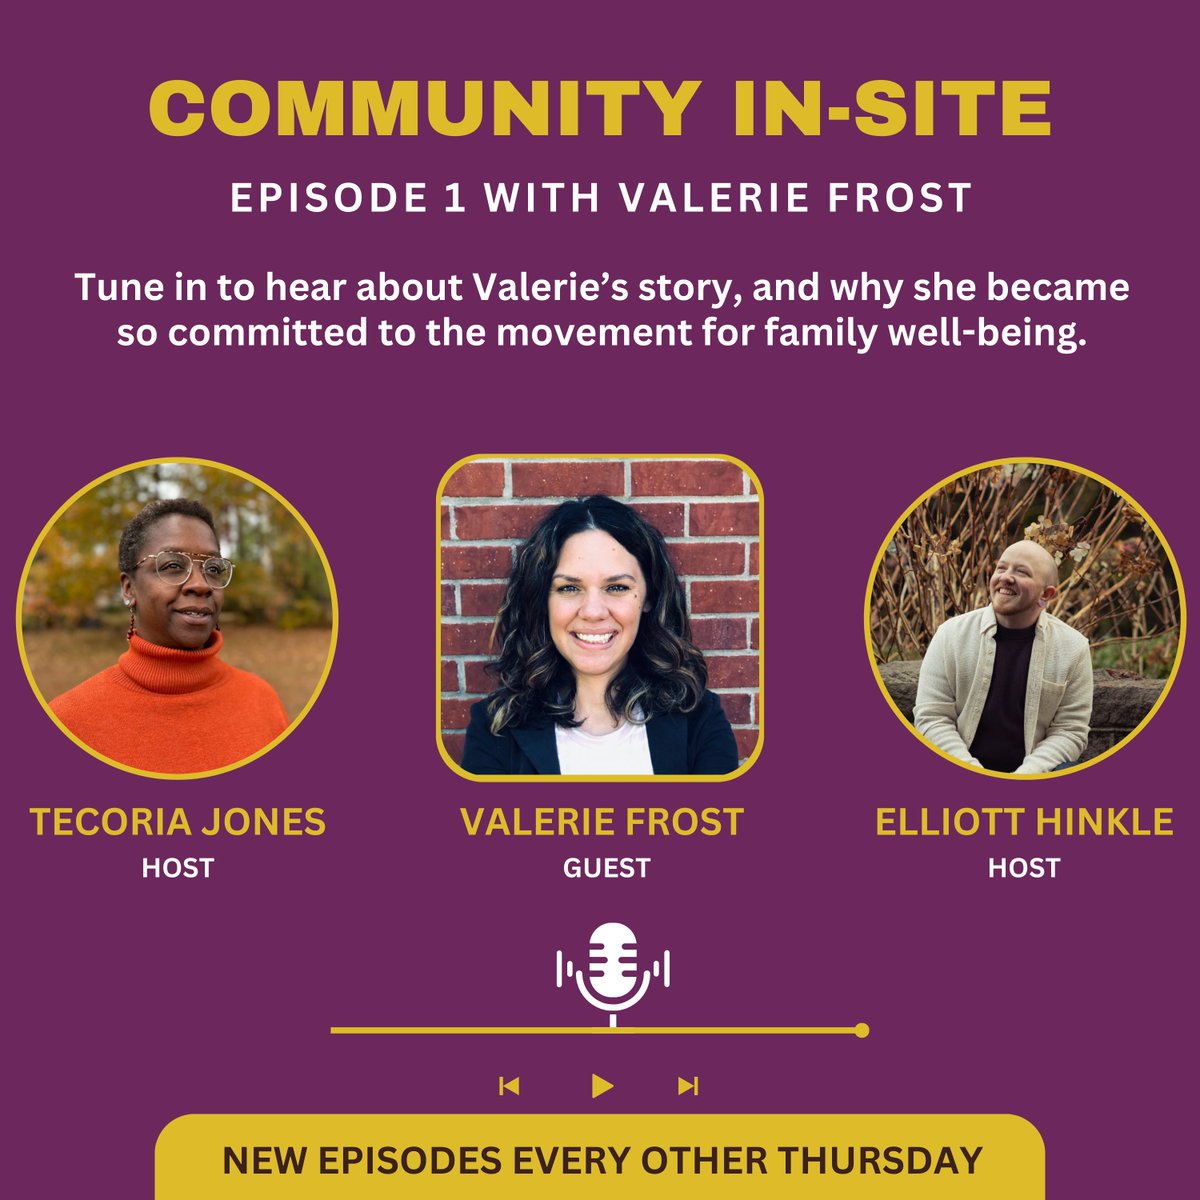 From our partners @KYYouth, tune in to the first 'Community In-Site' podcast to learn more about the family well-being movement. Listen on Apple podcasts.apple.com/us/podcast/com… or Spotify open.spotify.com/show/2AaDWDfXG…